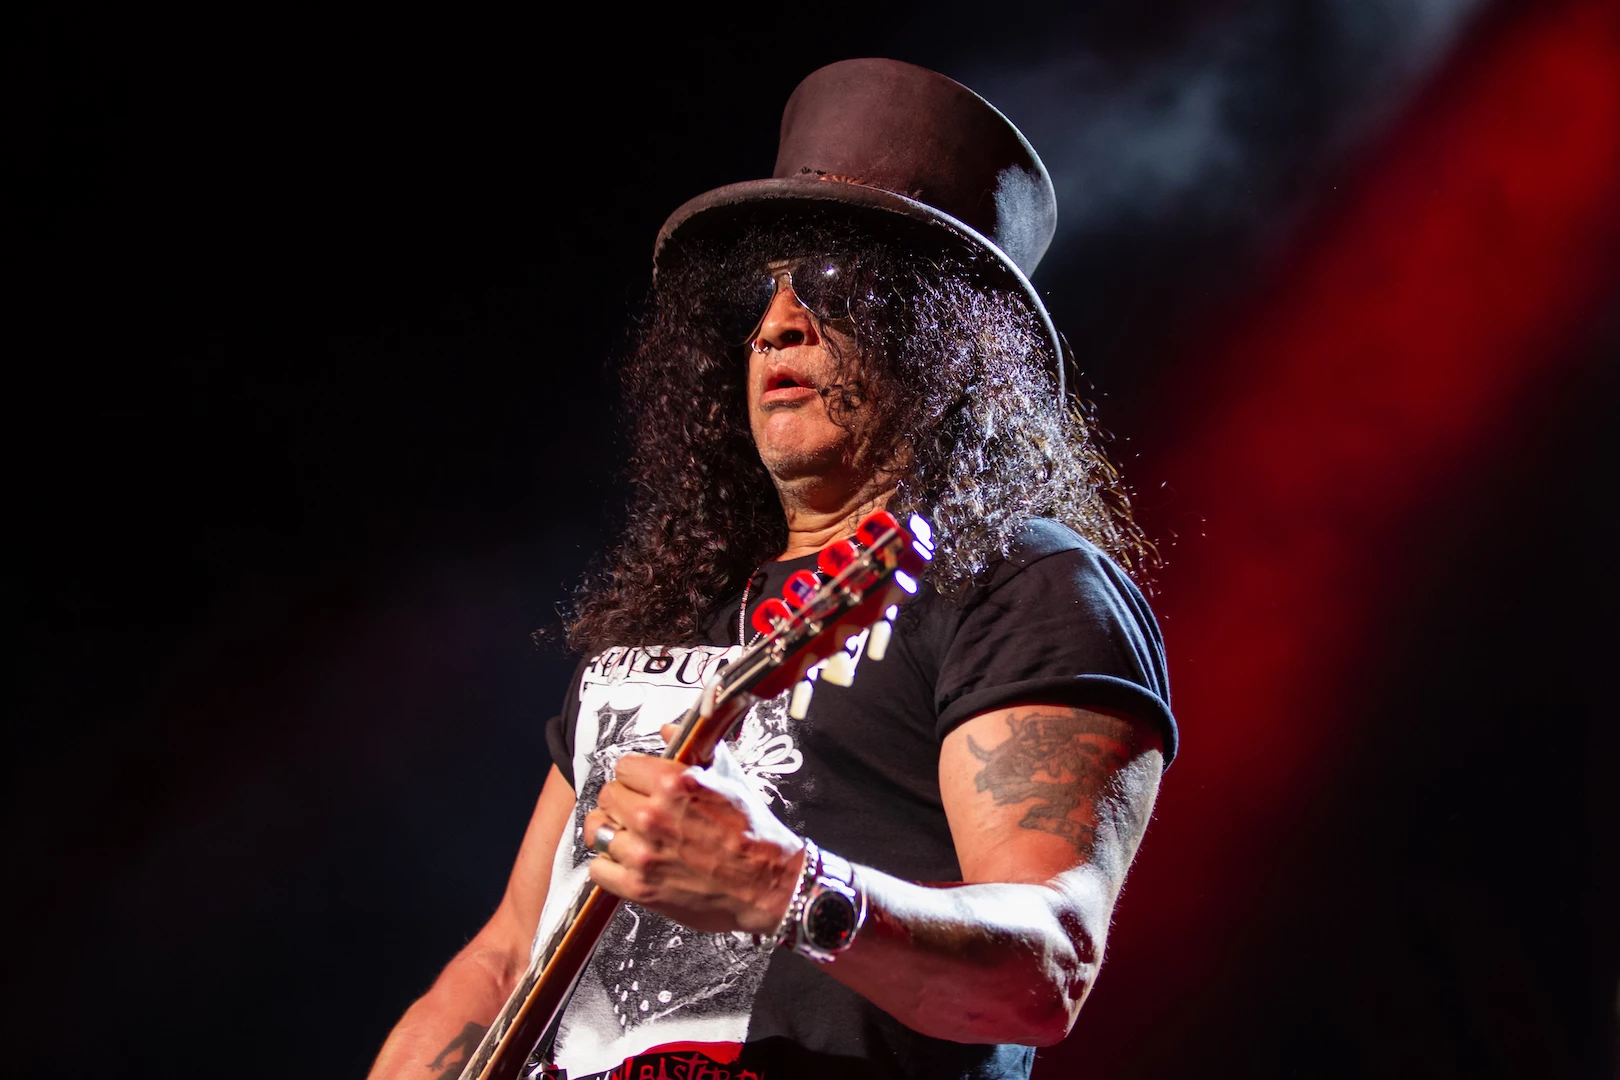 Slash Believes New Guns N' Roses Music Will Come Out in 2021